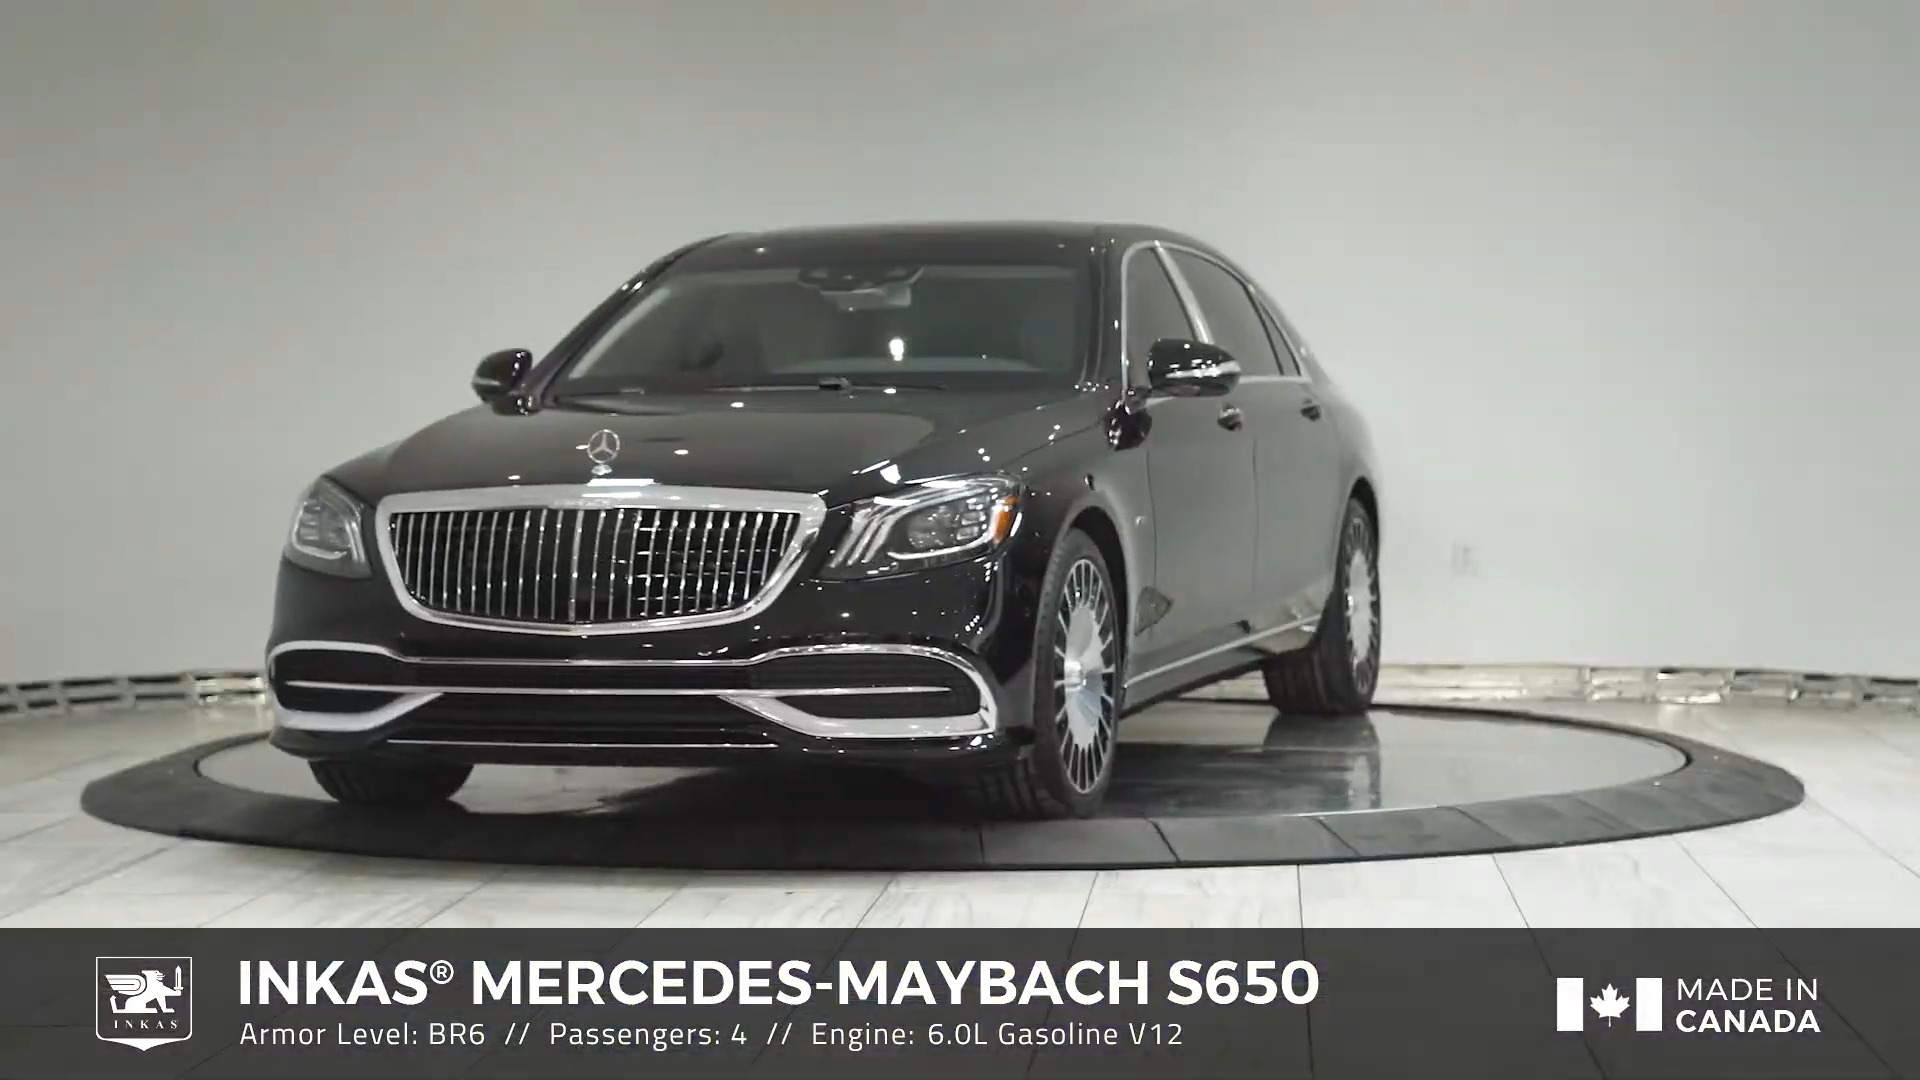 INKAS Armored Mercedes-Benz Maybach S650